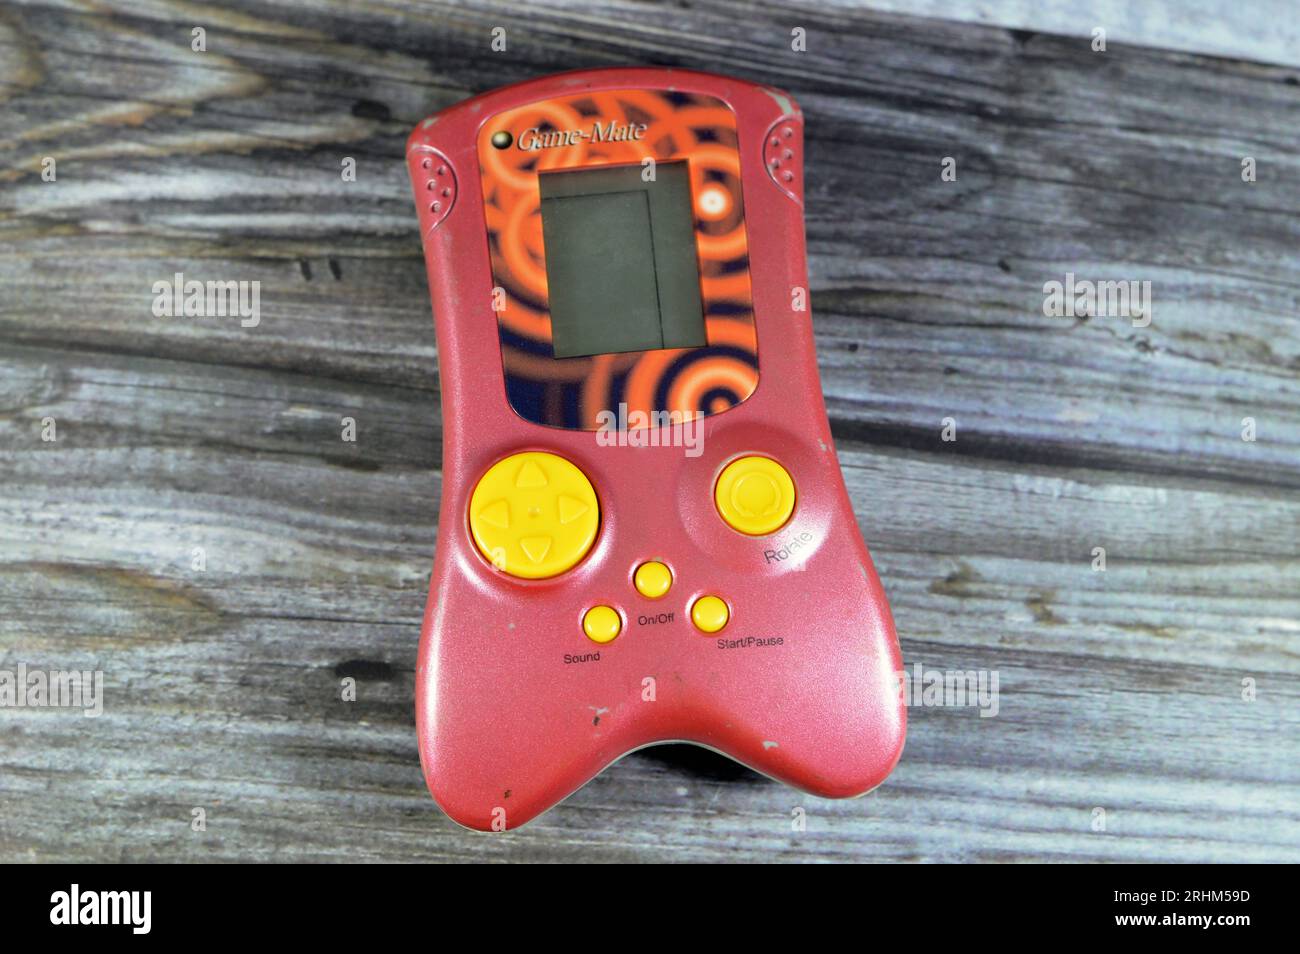 Giza, Egypt, August 12 2023: Old electronic Game-Mate, vintage retro mega entertainment games, portable game controller with built in LCD, 1990's old Stock Photo